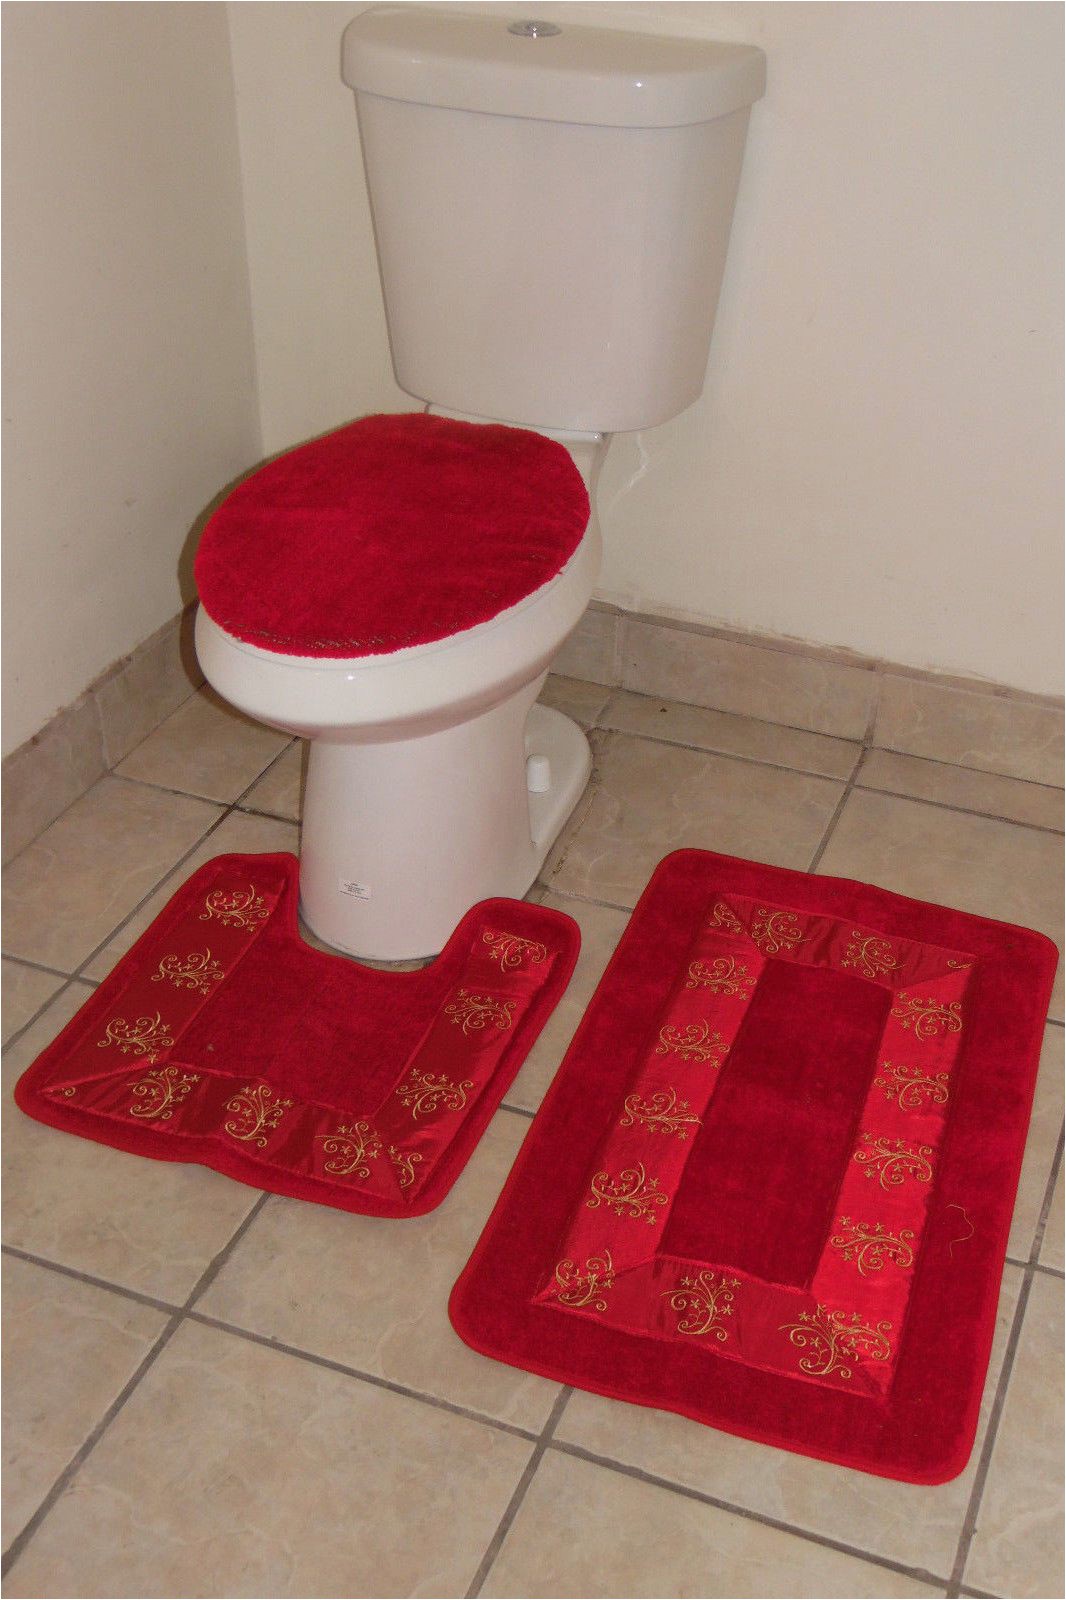 Cheap Red Bathroom Rugs Bathmats Rugs and toilet Covers 3pc 5 Red Bathroom